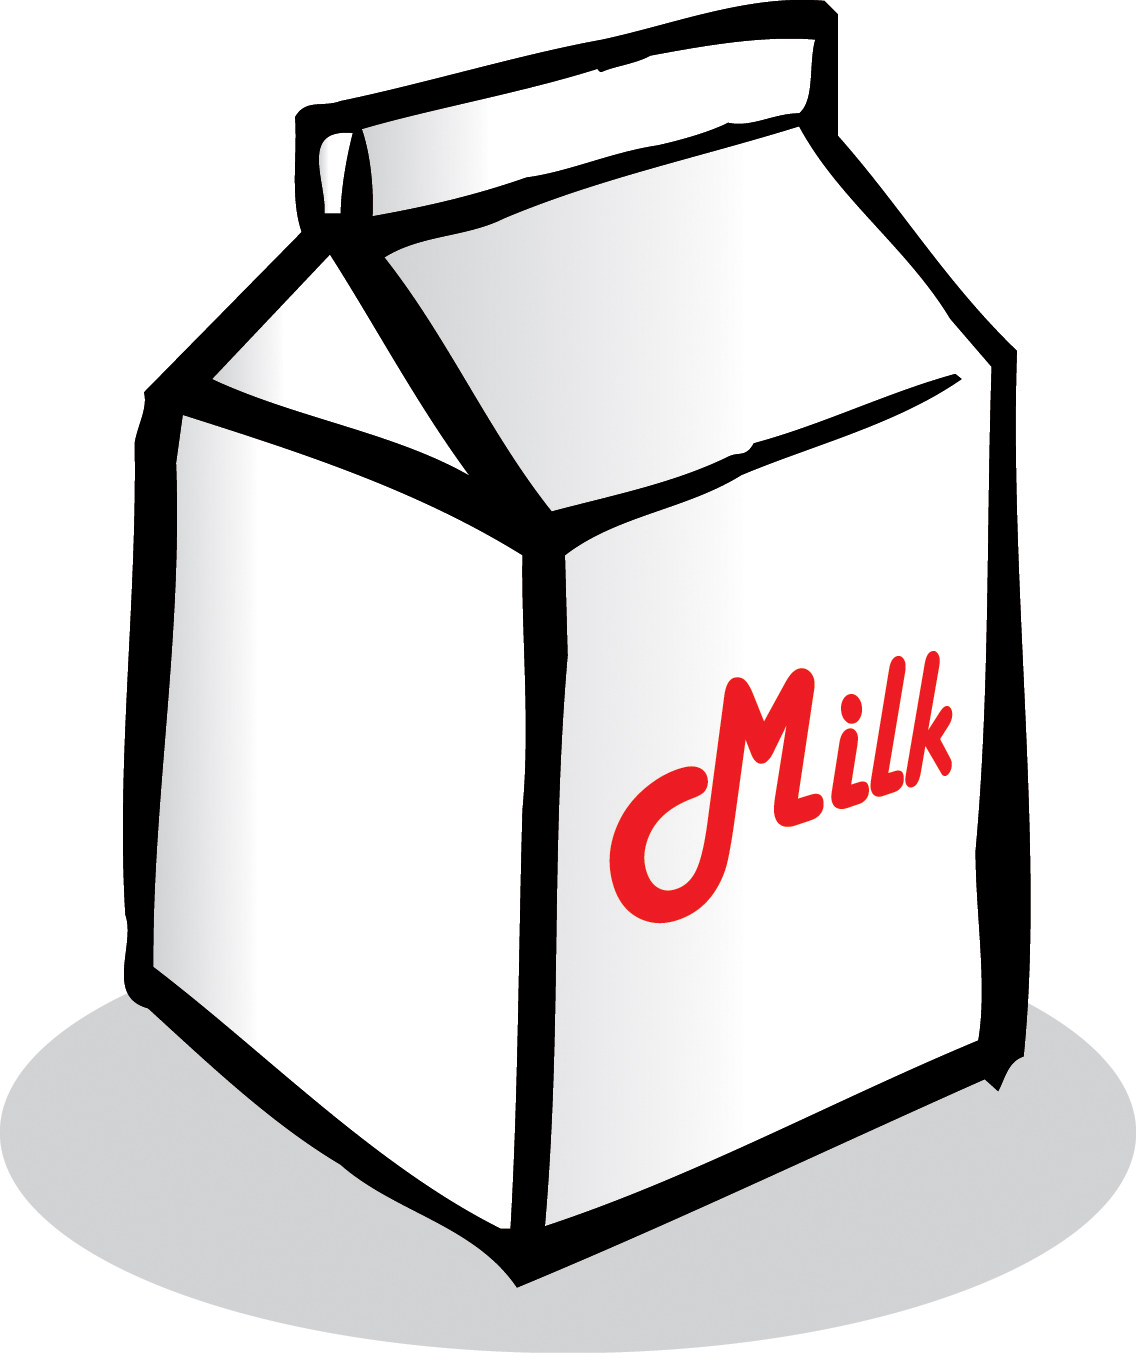 How could i make a giant milk carton for a science fair project?